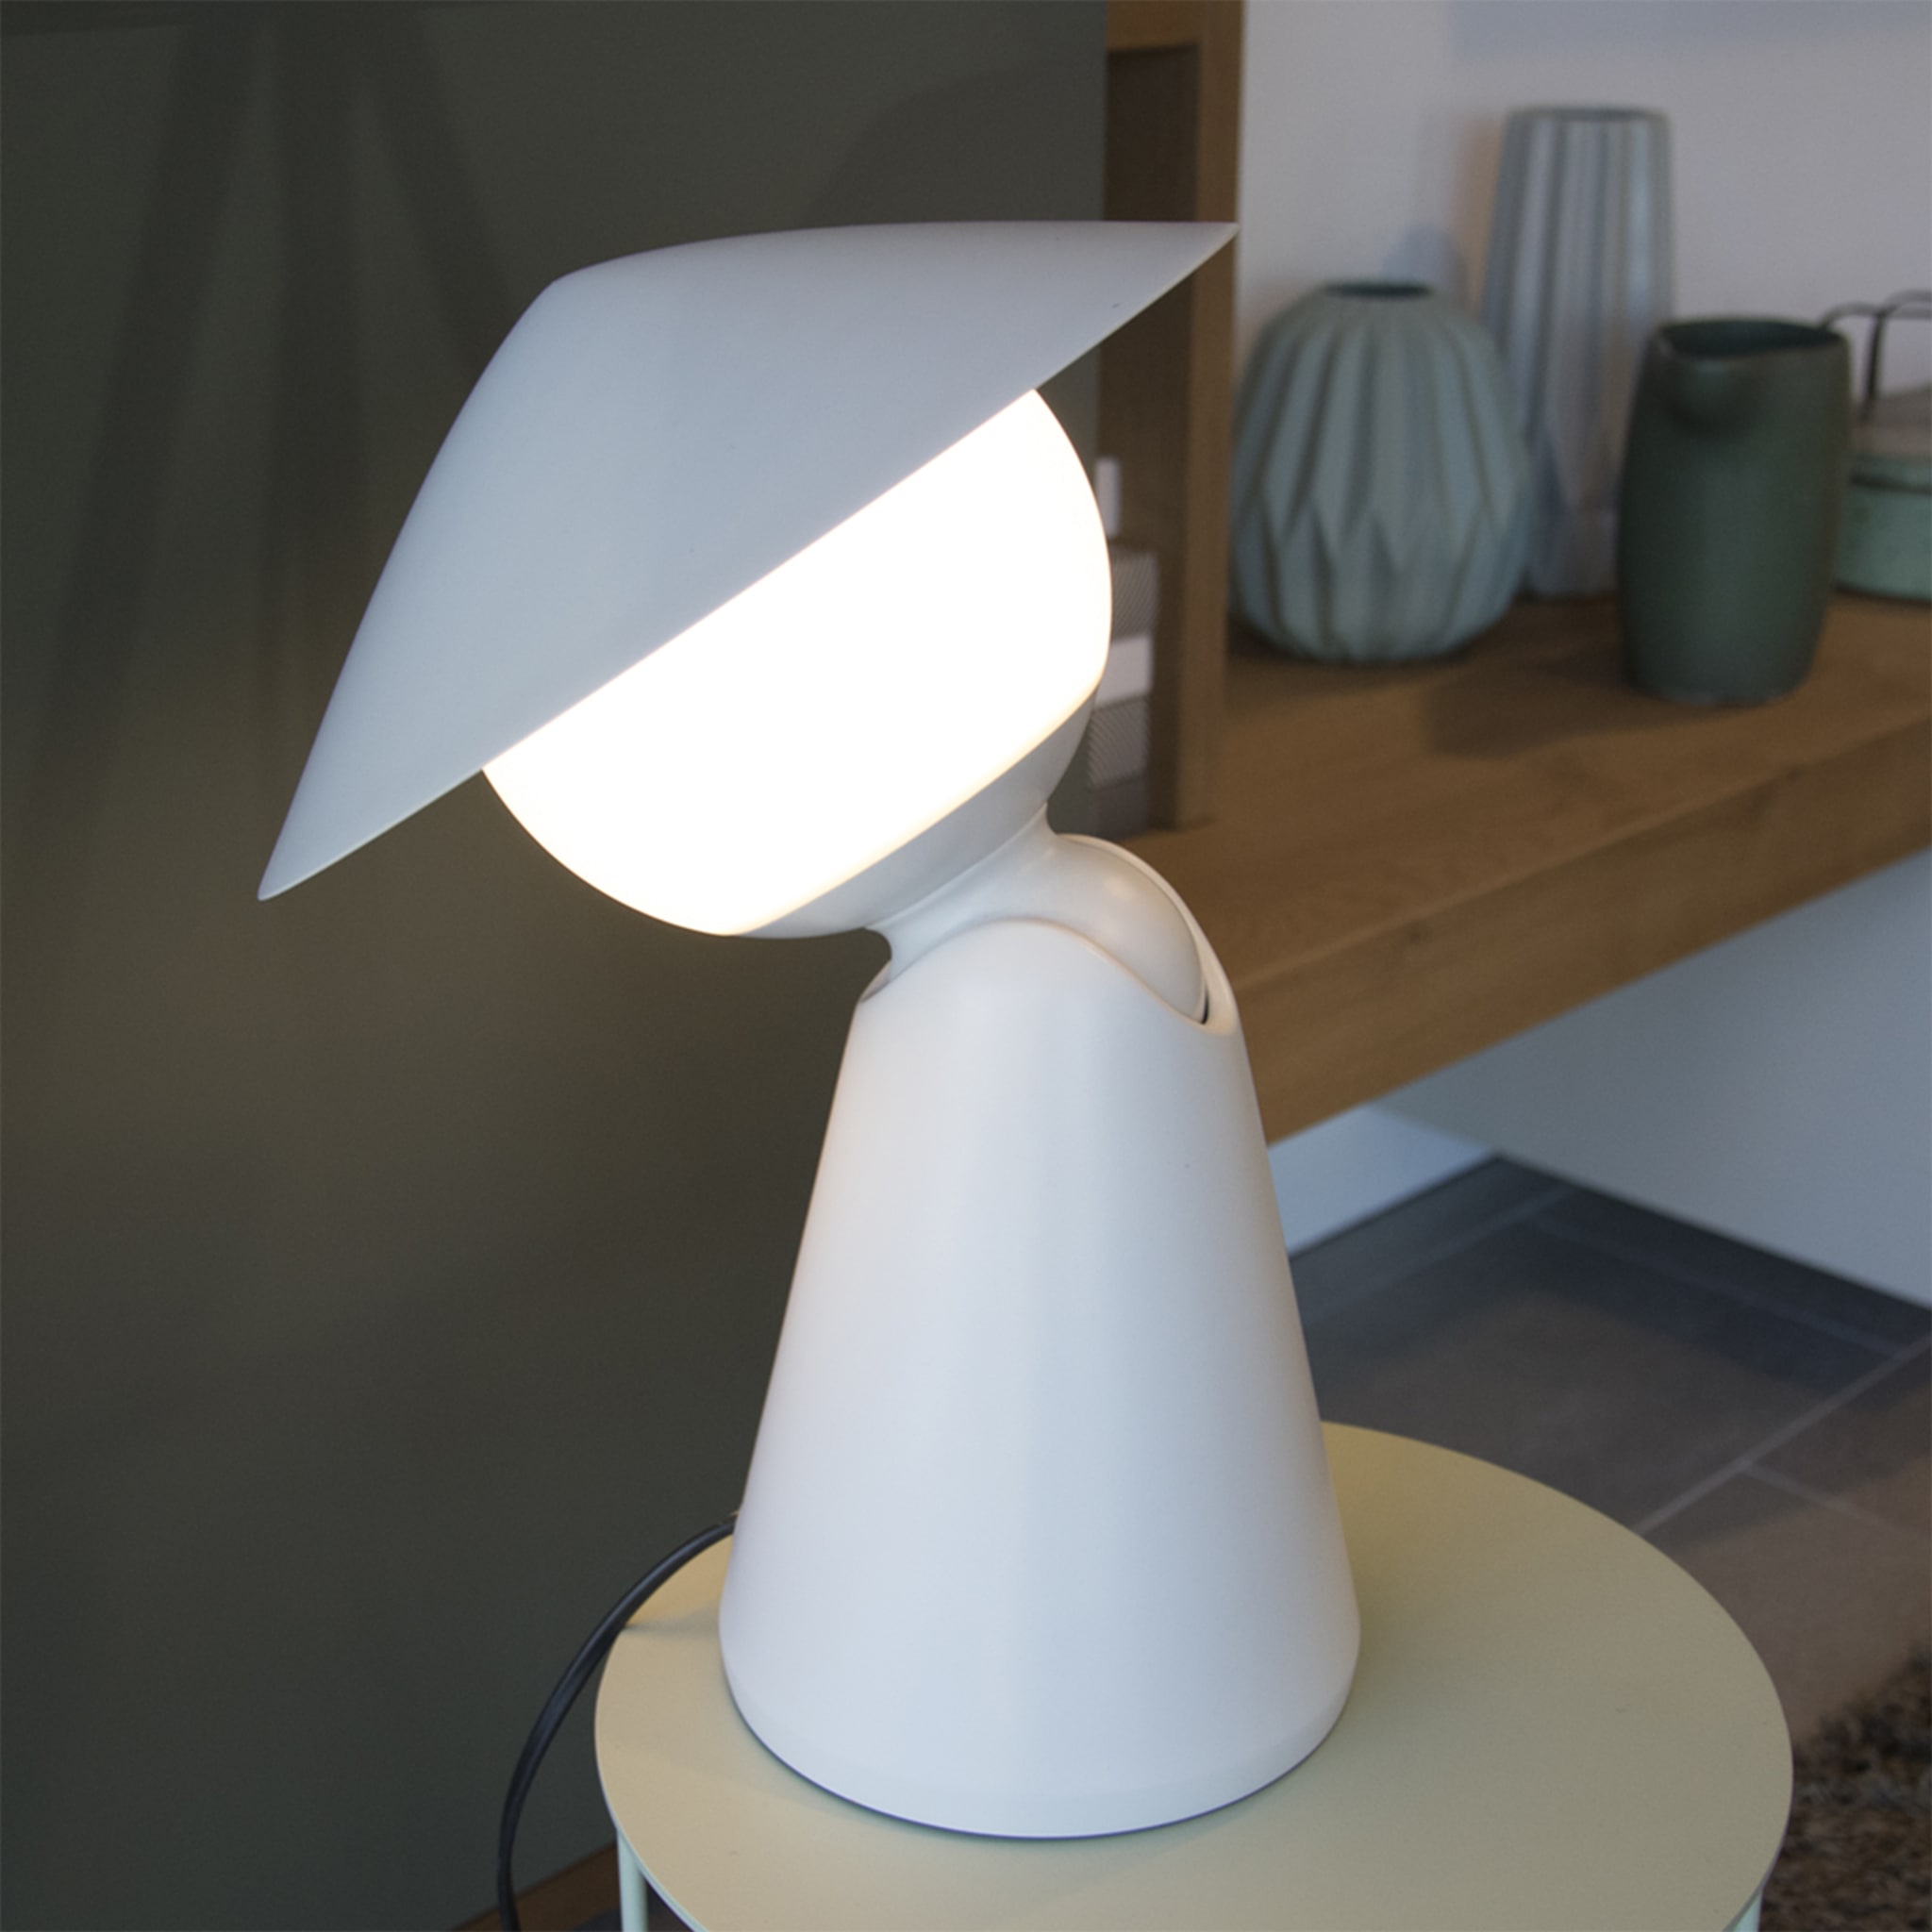 Puddy Gray Table Lamp by Albore Design - Alternative view 3